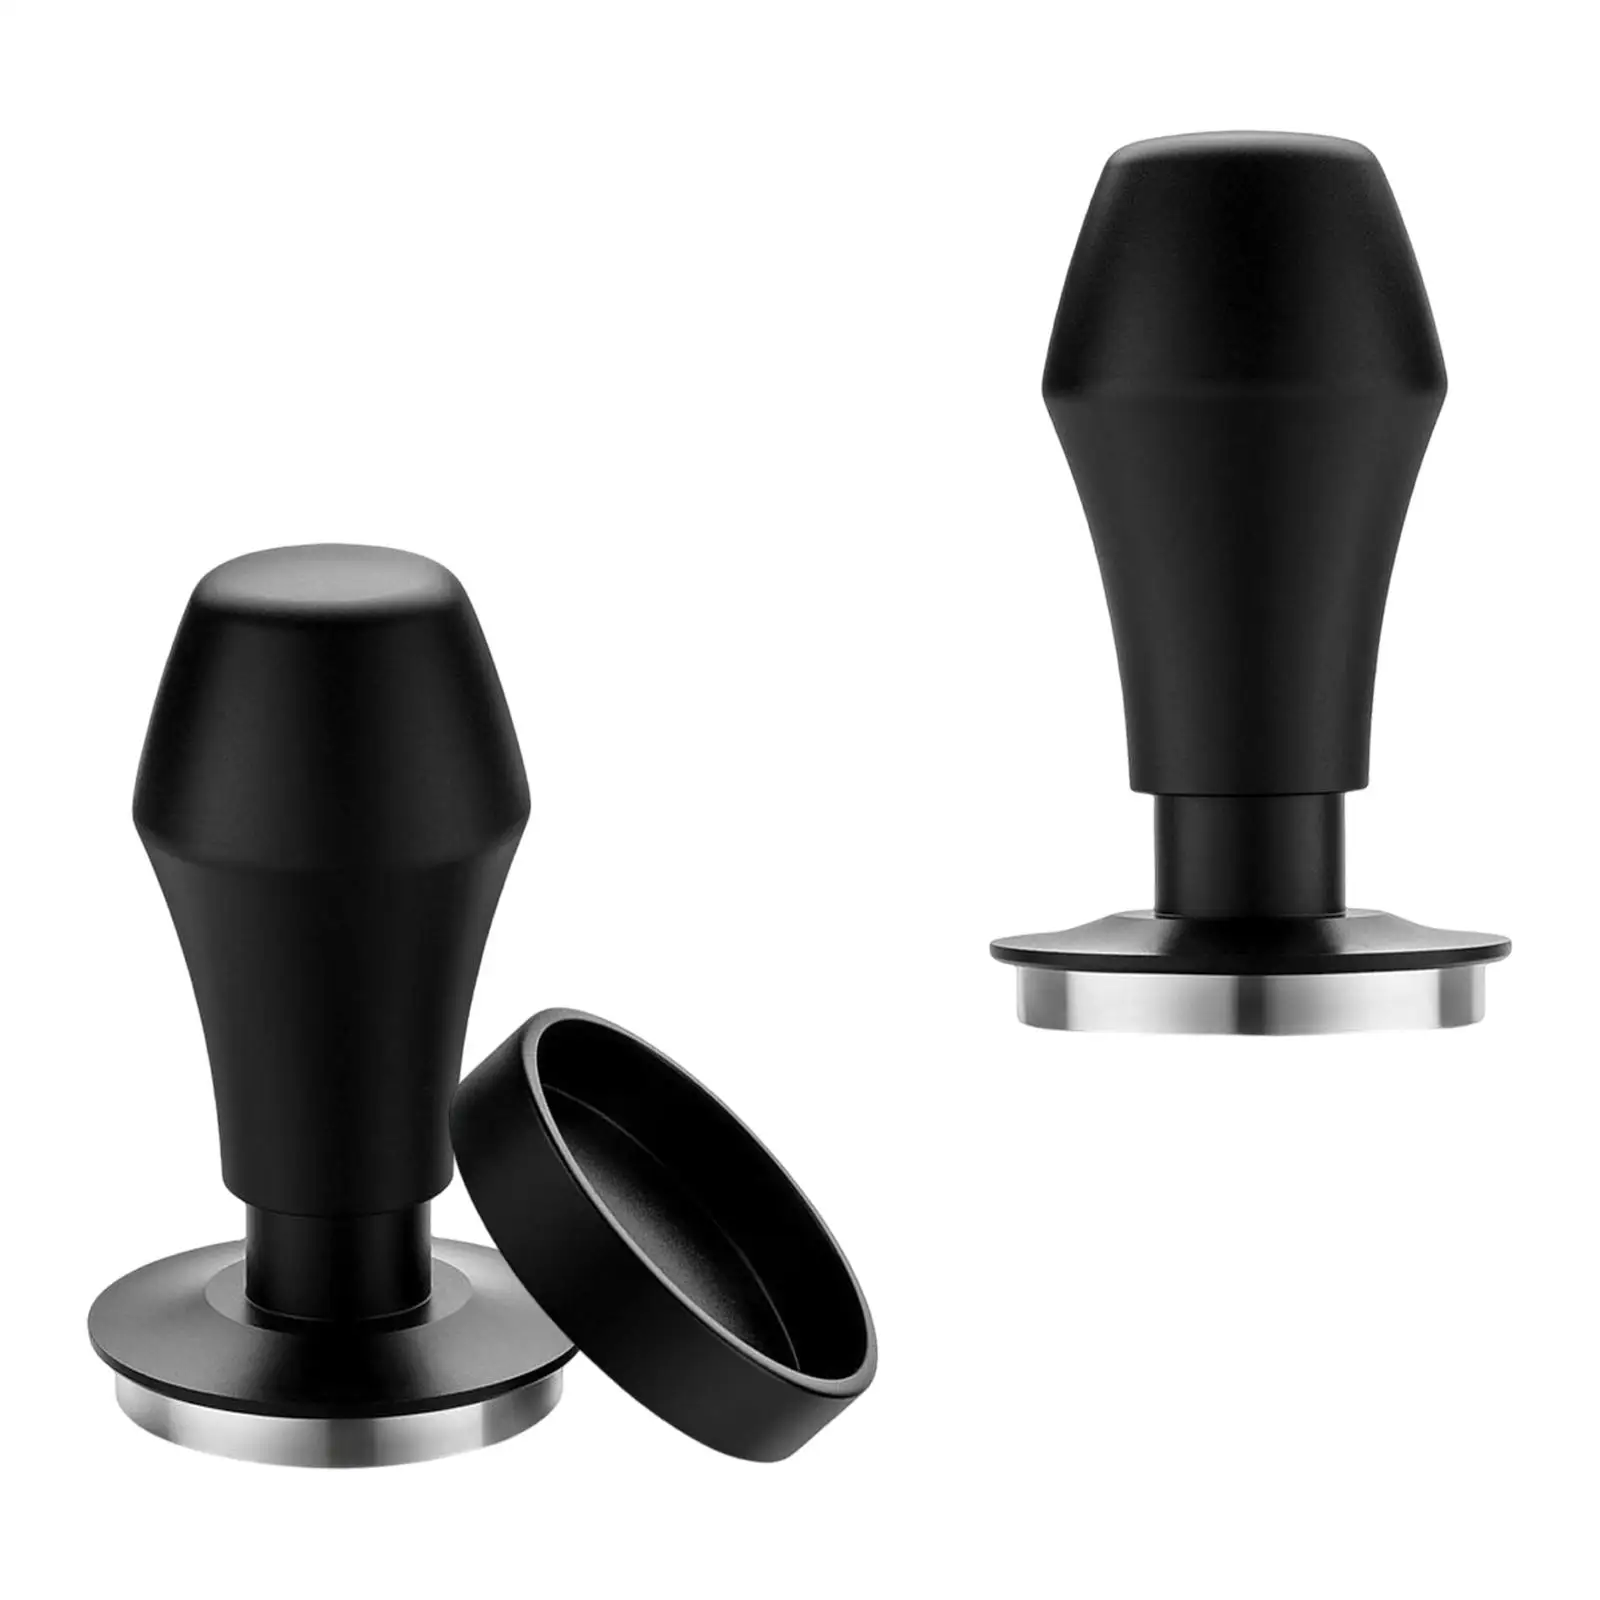 Coffee Tamper Replacement Barista Accessories Calibrated Creative for Home